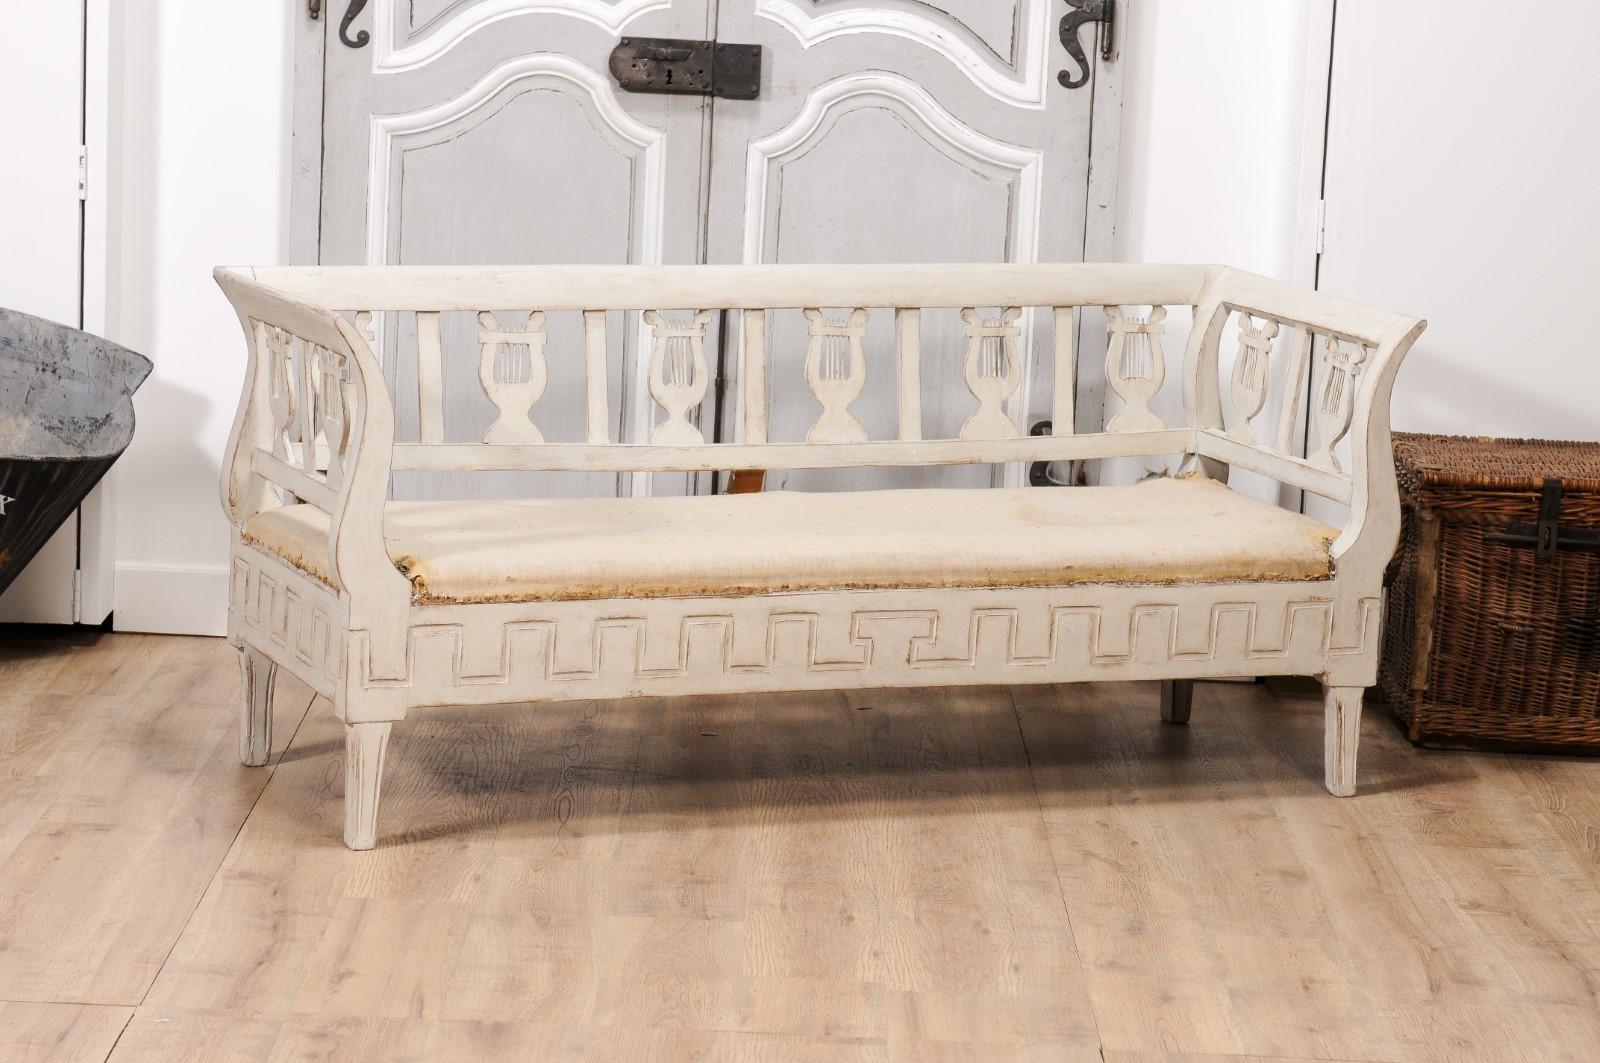 A Swedish Karl Johan period painted wood sofa from circa 1820 with carved lyres, out-scrolling arms, meander frieze and tapered legs. Step into the elegant period of Karl Johan with this beautifully crafted Swedish painted wood sofa from circa 1820.